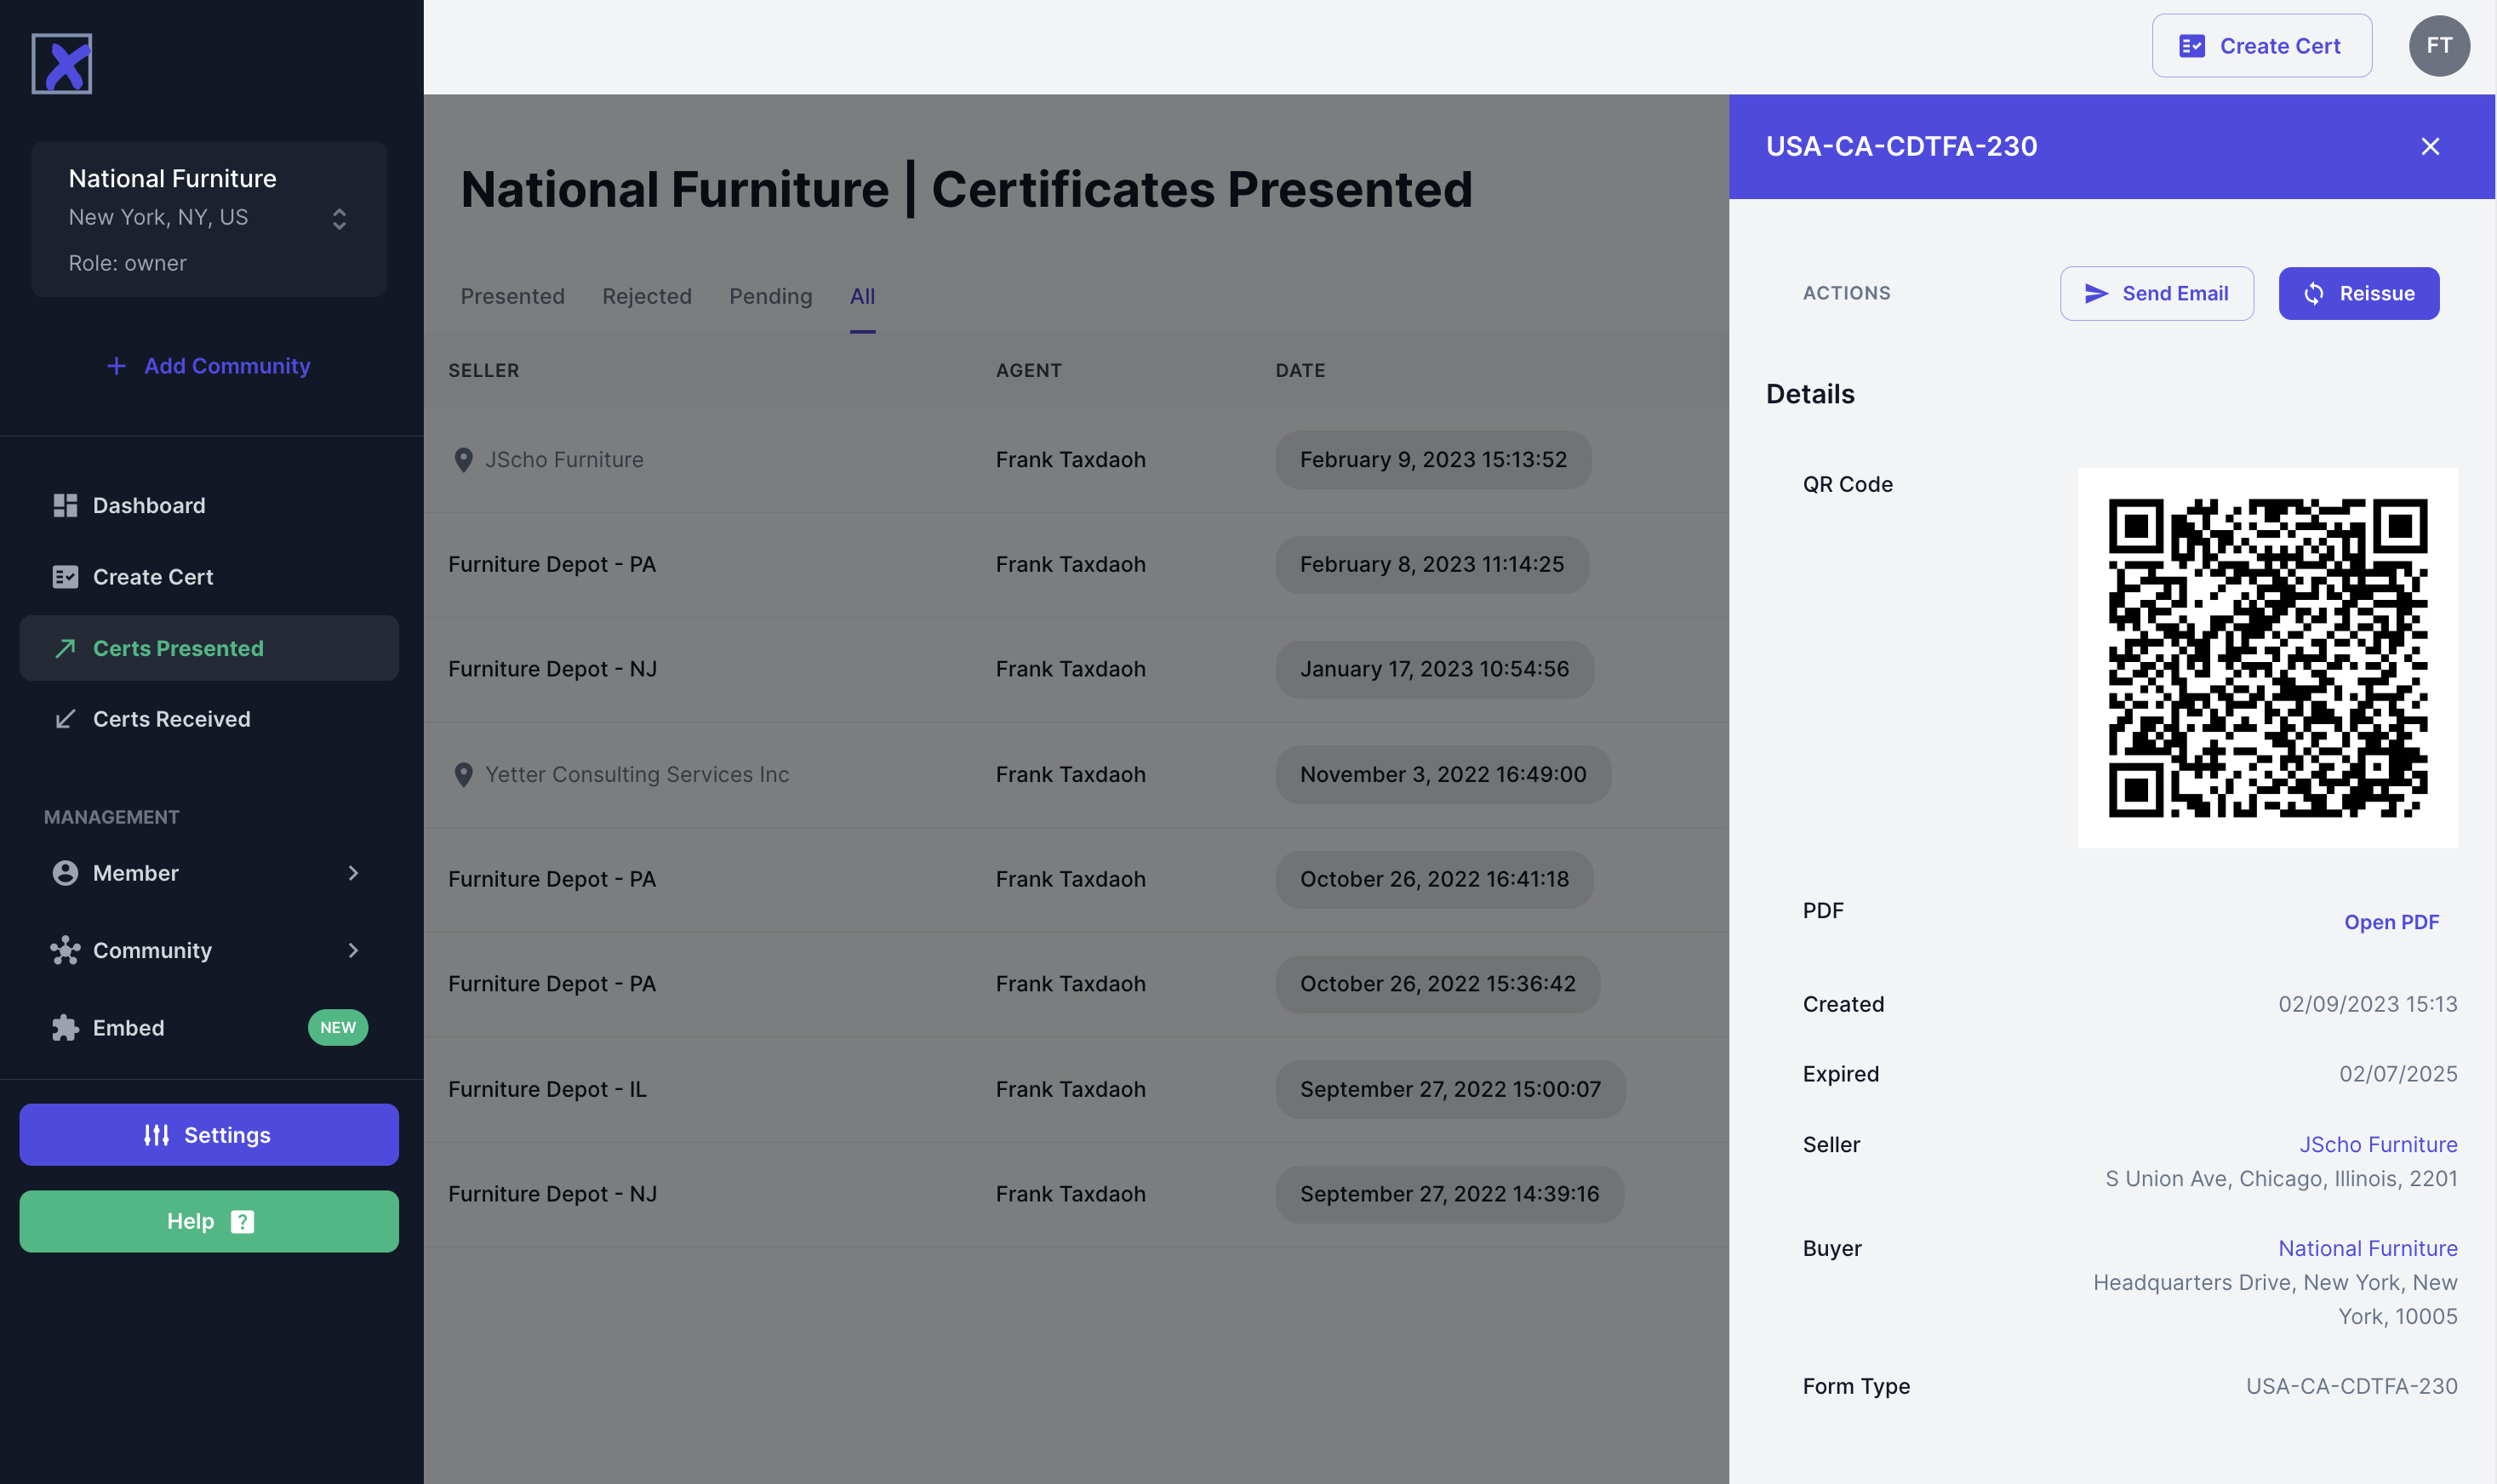 Whether it's certs received or delivered, users can filter their activities and quickly find the certs they need.  All of the details are a click away, including renewals.